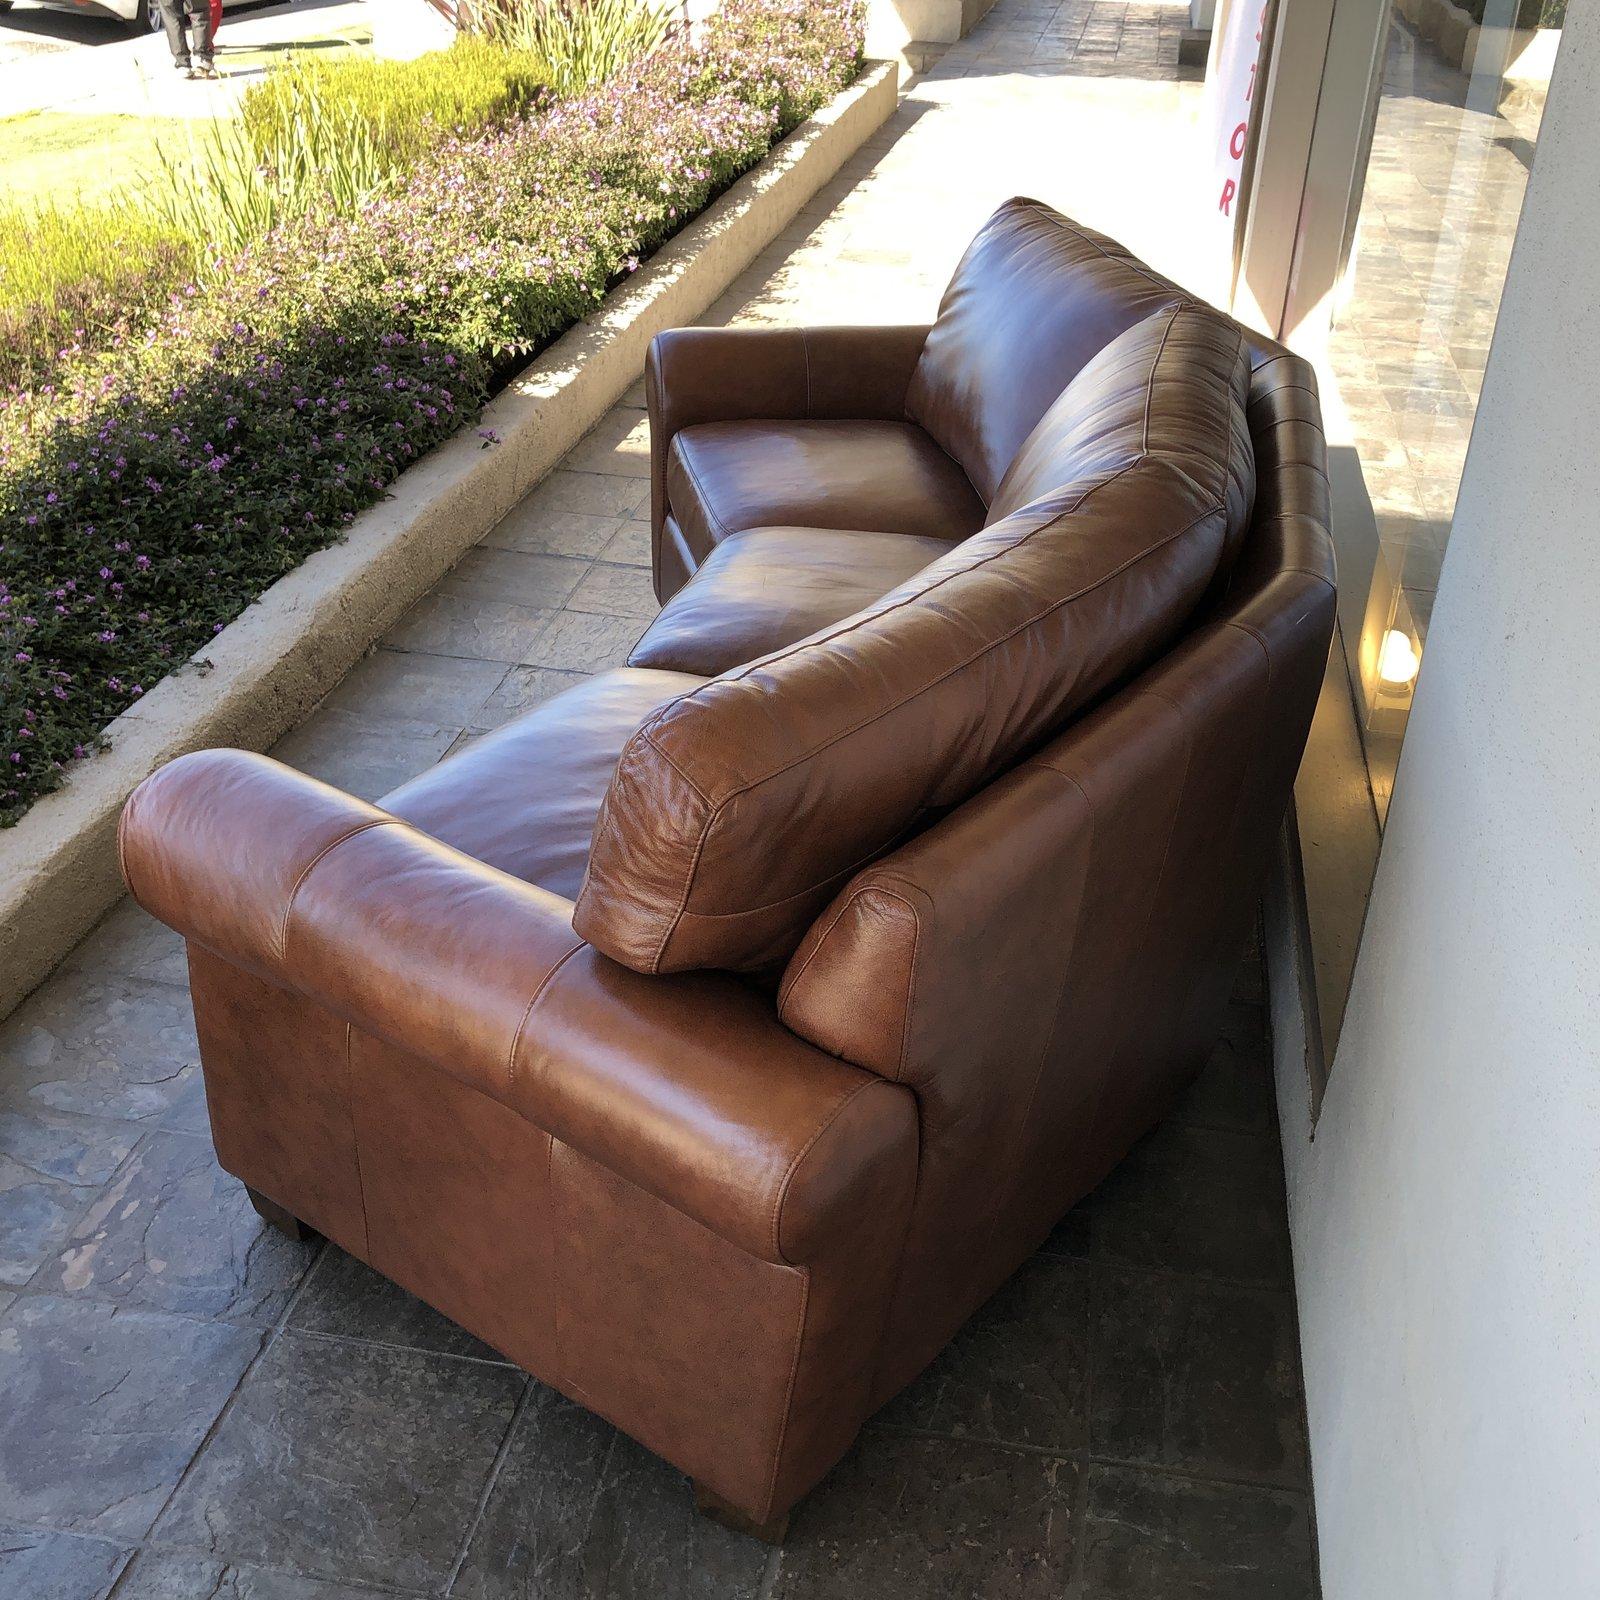 Custom sofa by Omnia Leather. Featuring a curved silhouette, to induce conversation, this Classic sofa invites comfort with loose back foam cushions, down wrapped seat cushions and gentle rolled arms. Southwest Pecan brown leather.

Original price